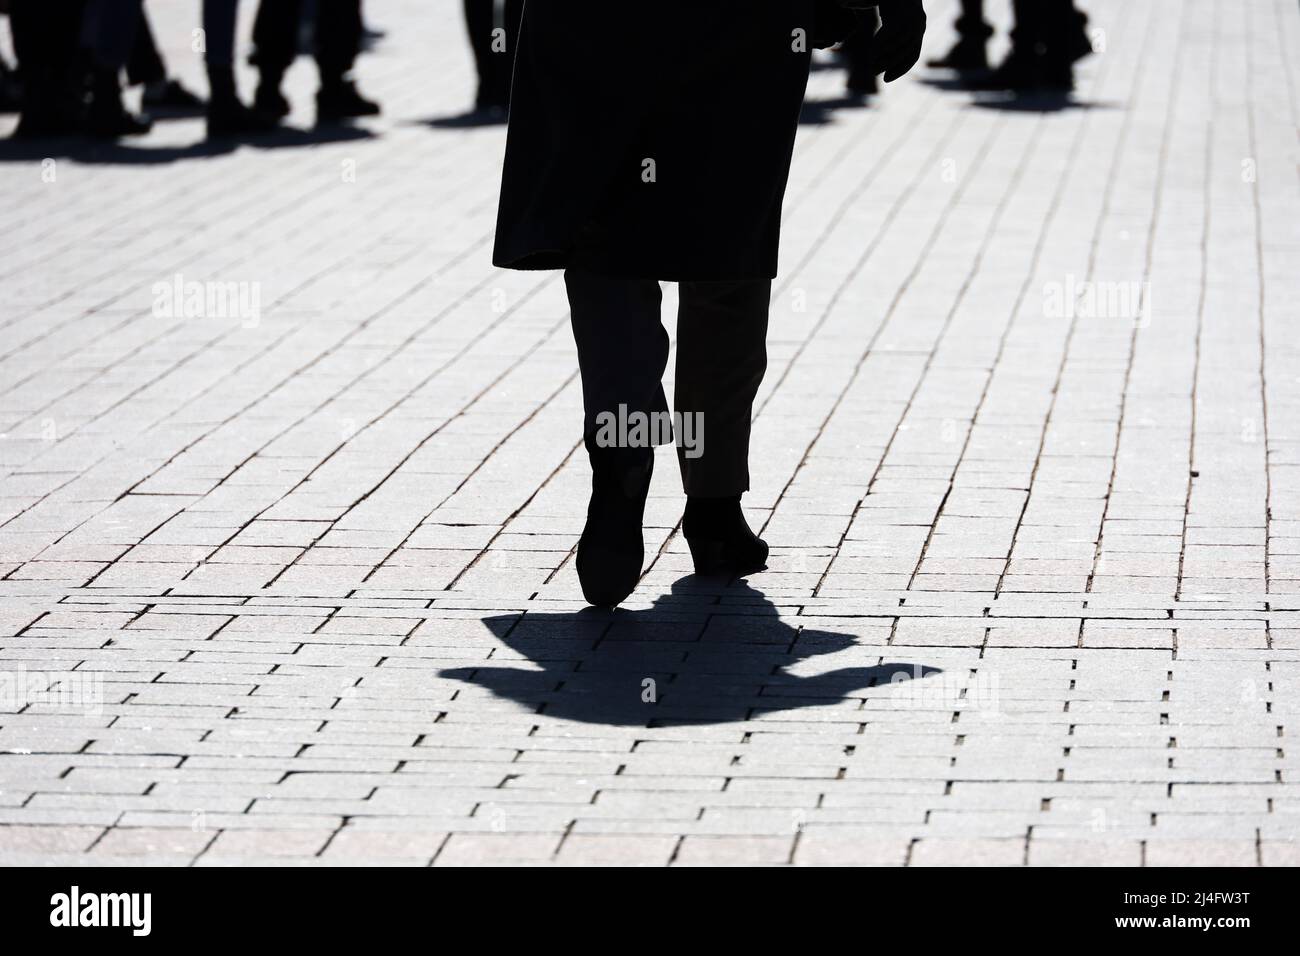 Silhouette and shadow of woman walking on a city street on crowd of people background. Concept of strangers, crime, society or population Stock Photo